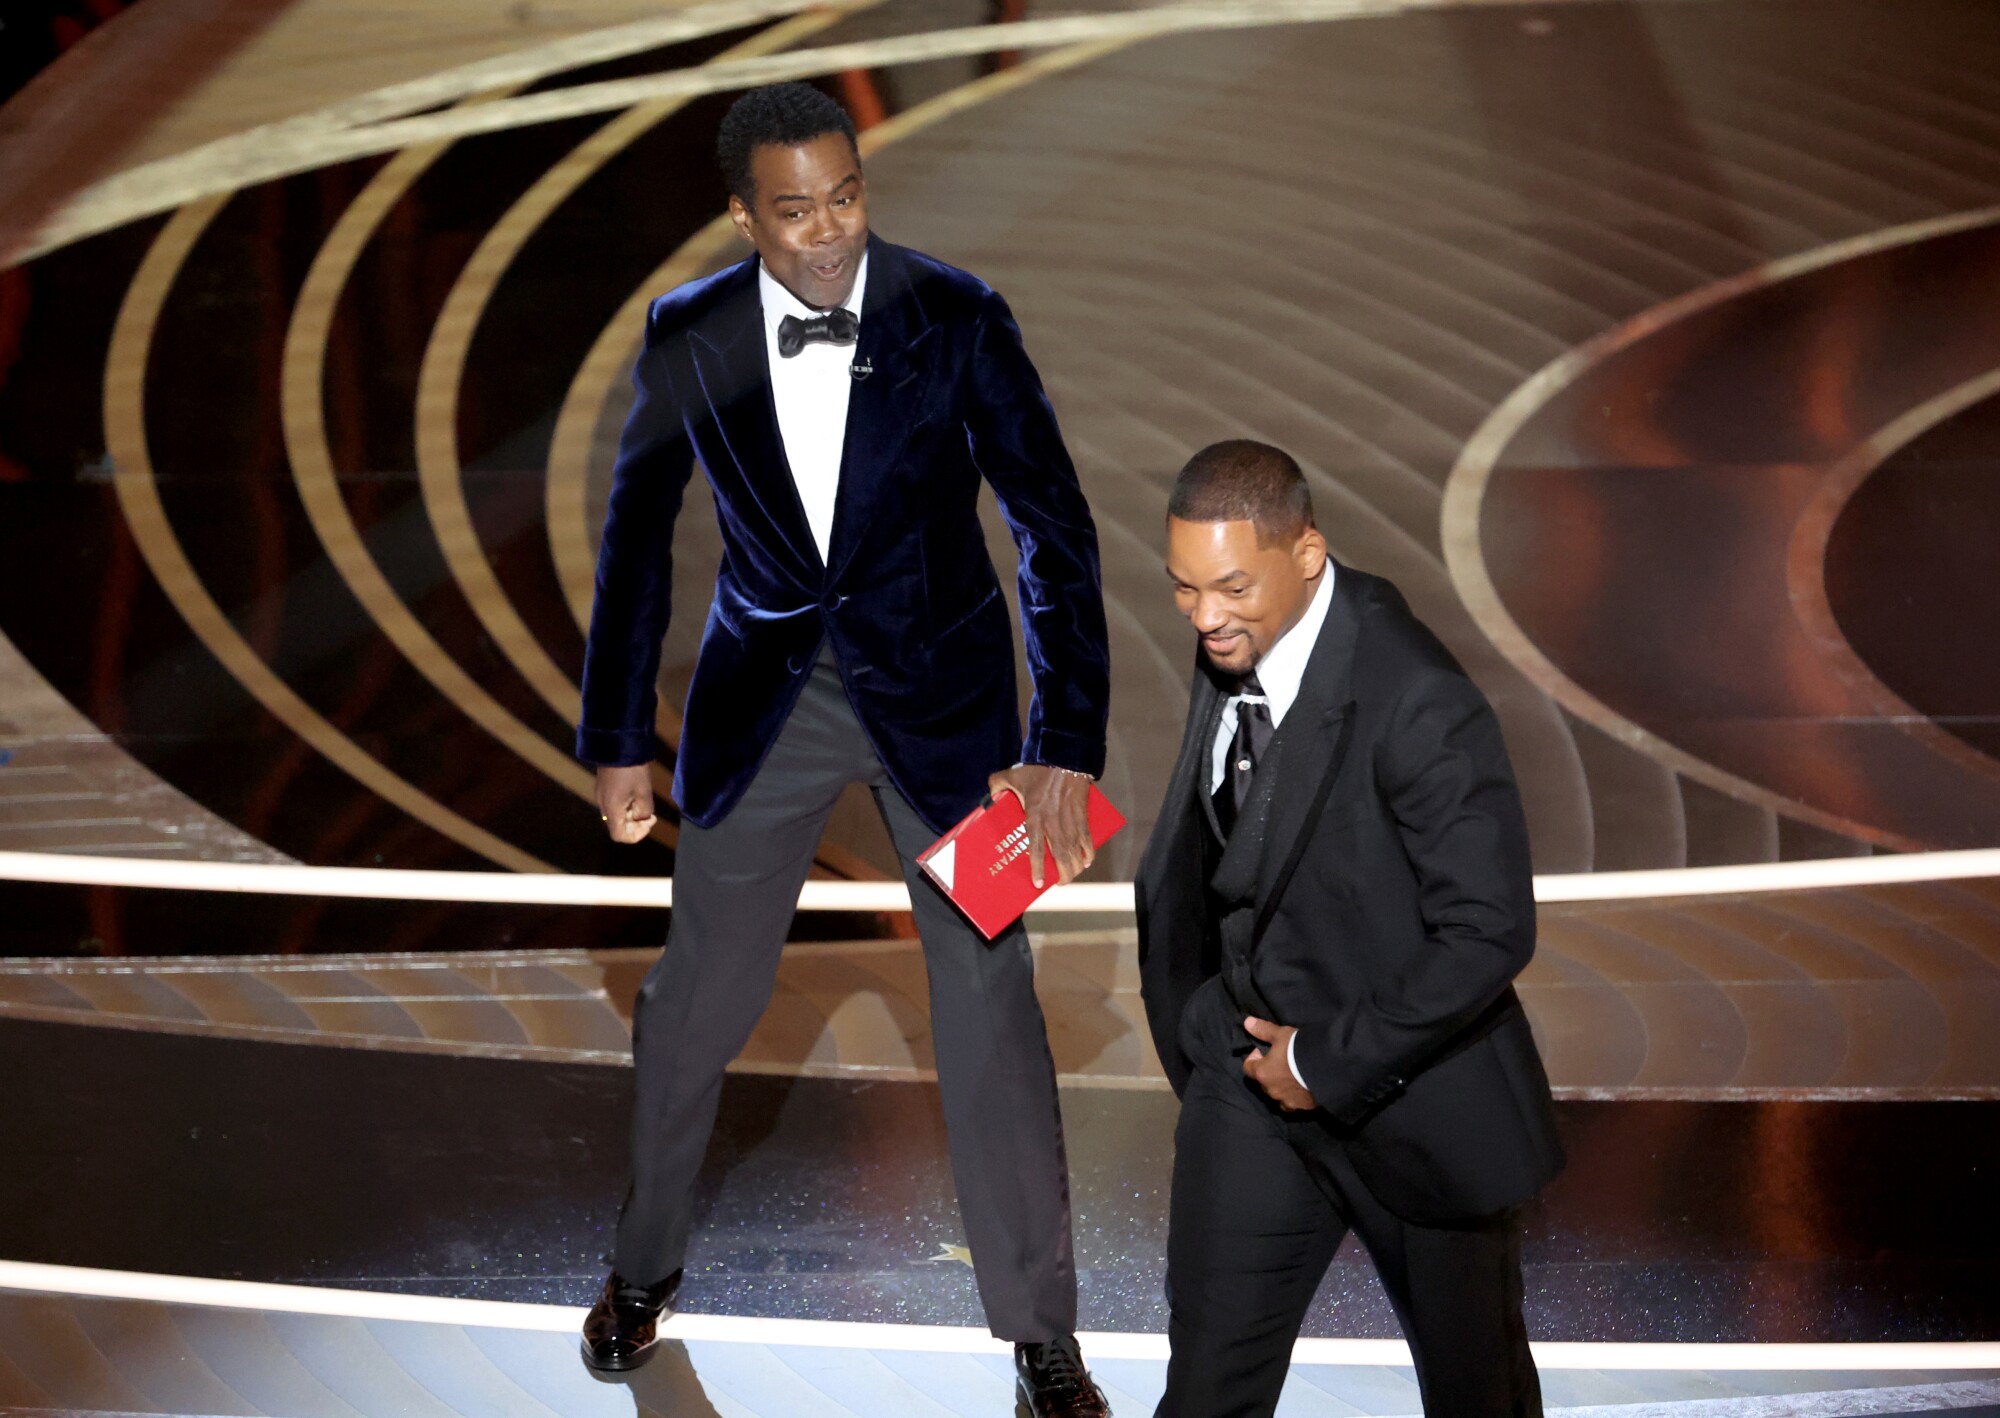 Will Smith leaves the stage after slapping Chris Rock during the 94th Academy Awards at the Dolby Theatre.